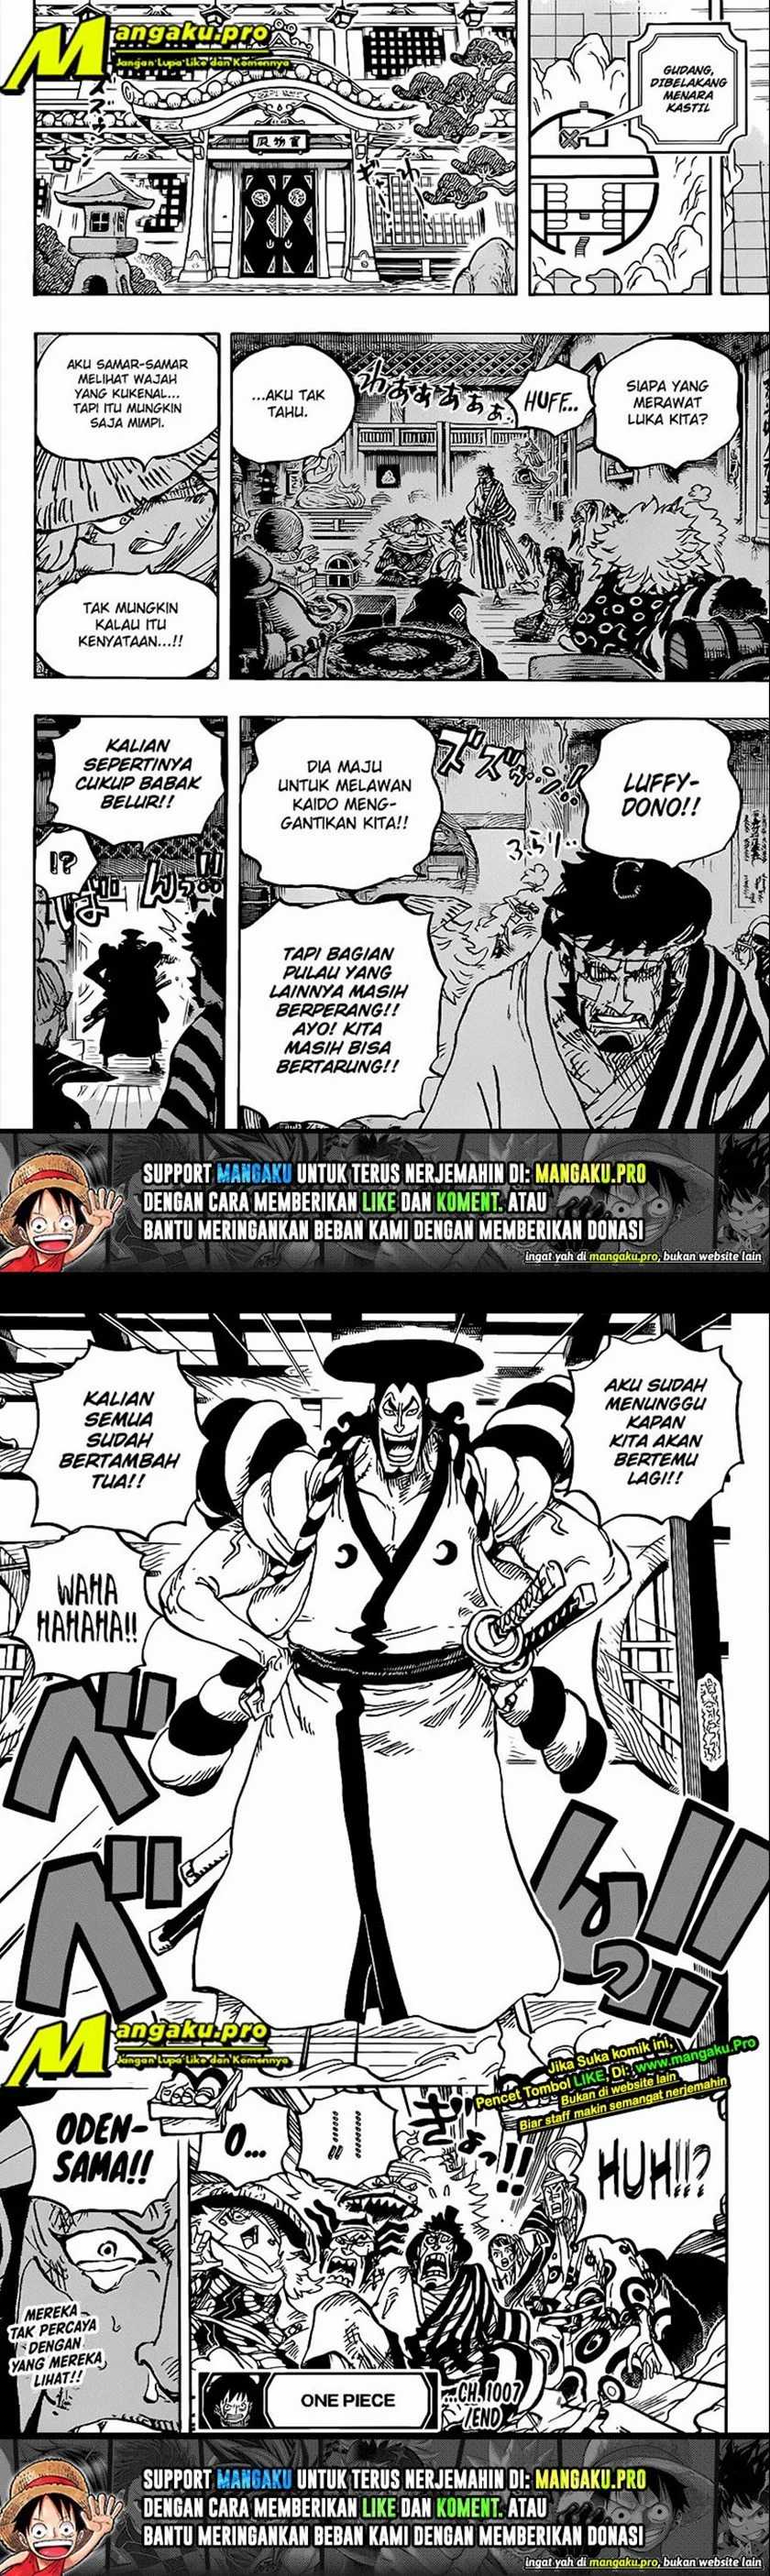 One Piece Chapter 1007 Hq - 53